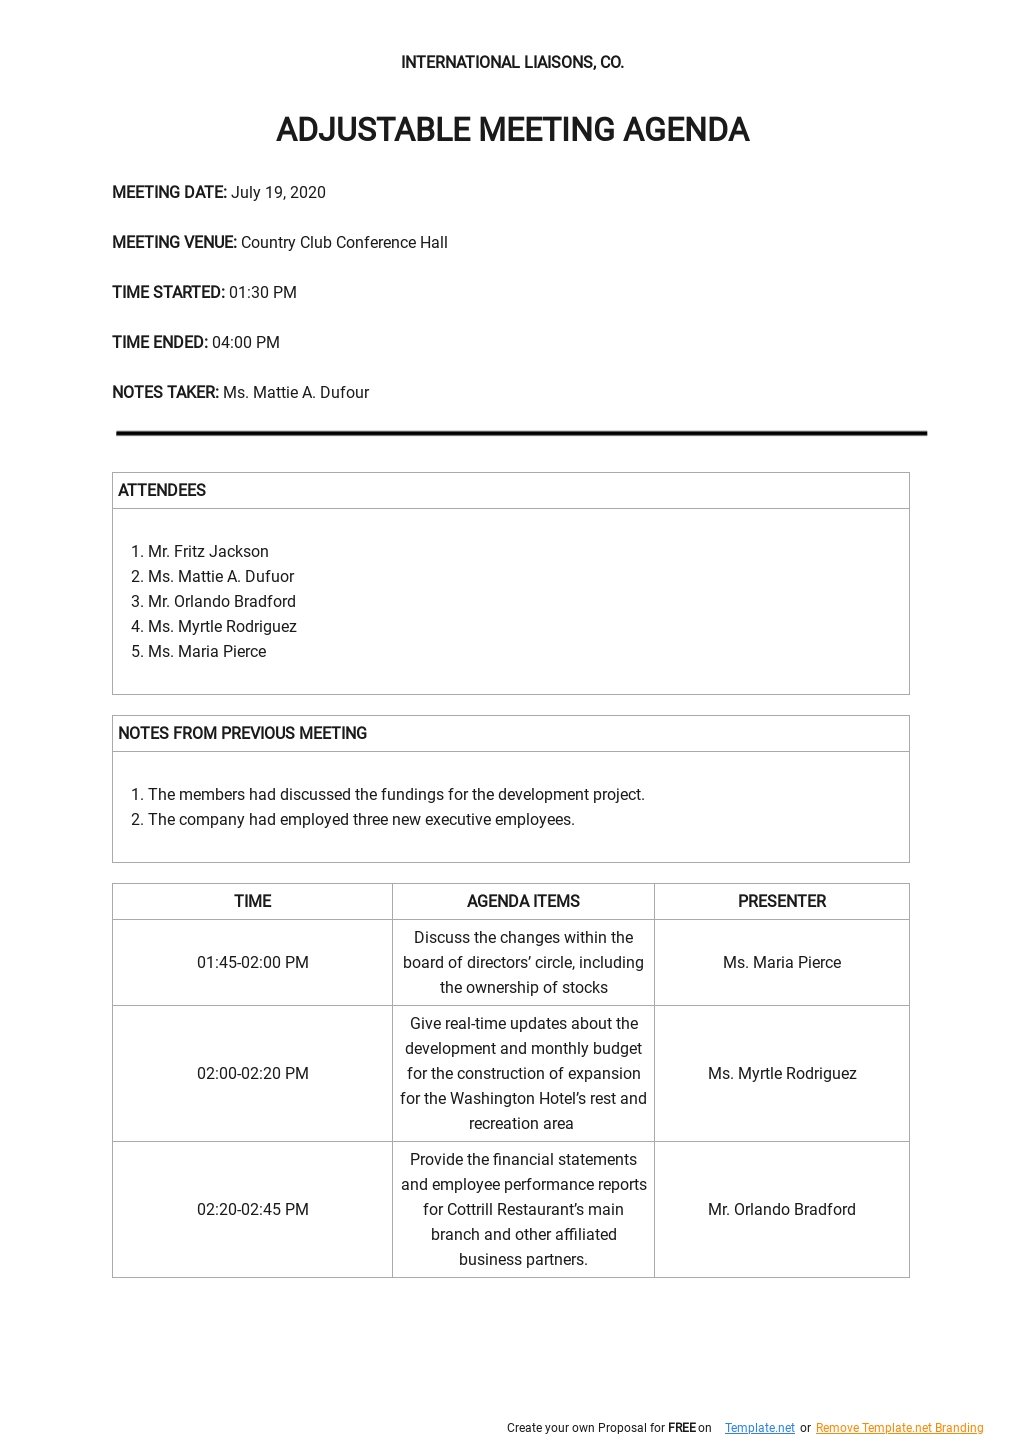 Free Adjustable Meeting Agenda Template in Word, Google Docs, Apple Pages